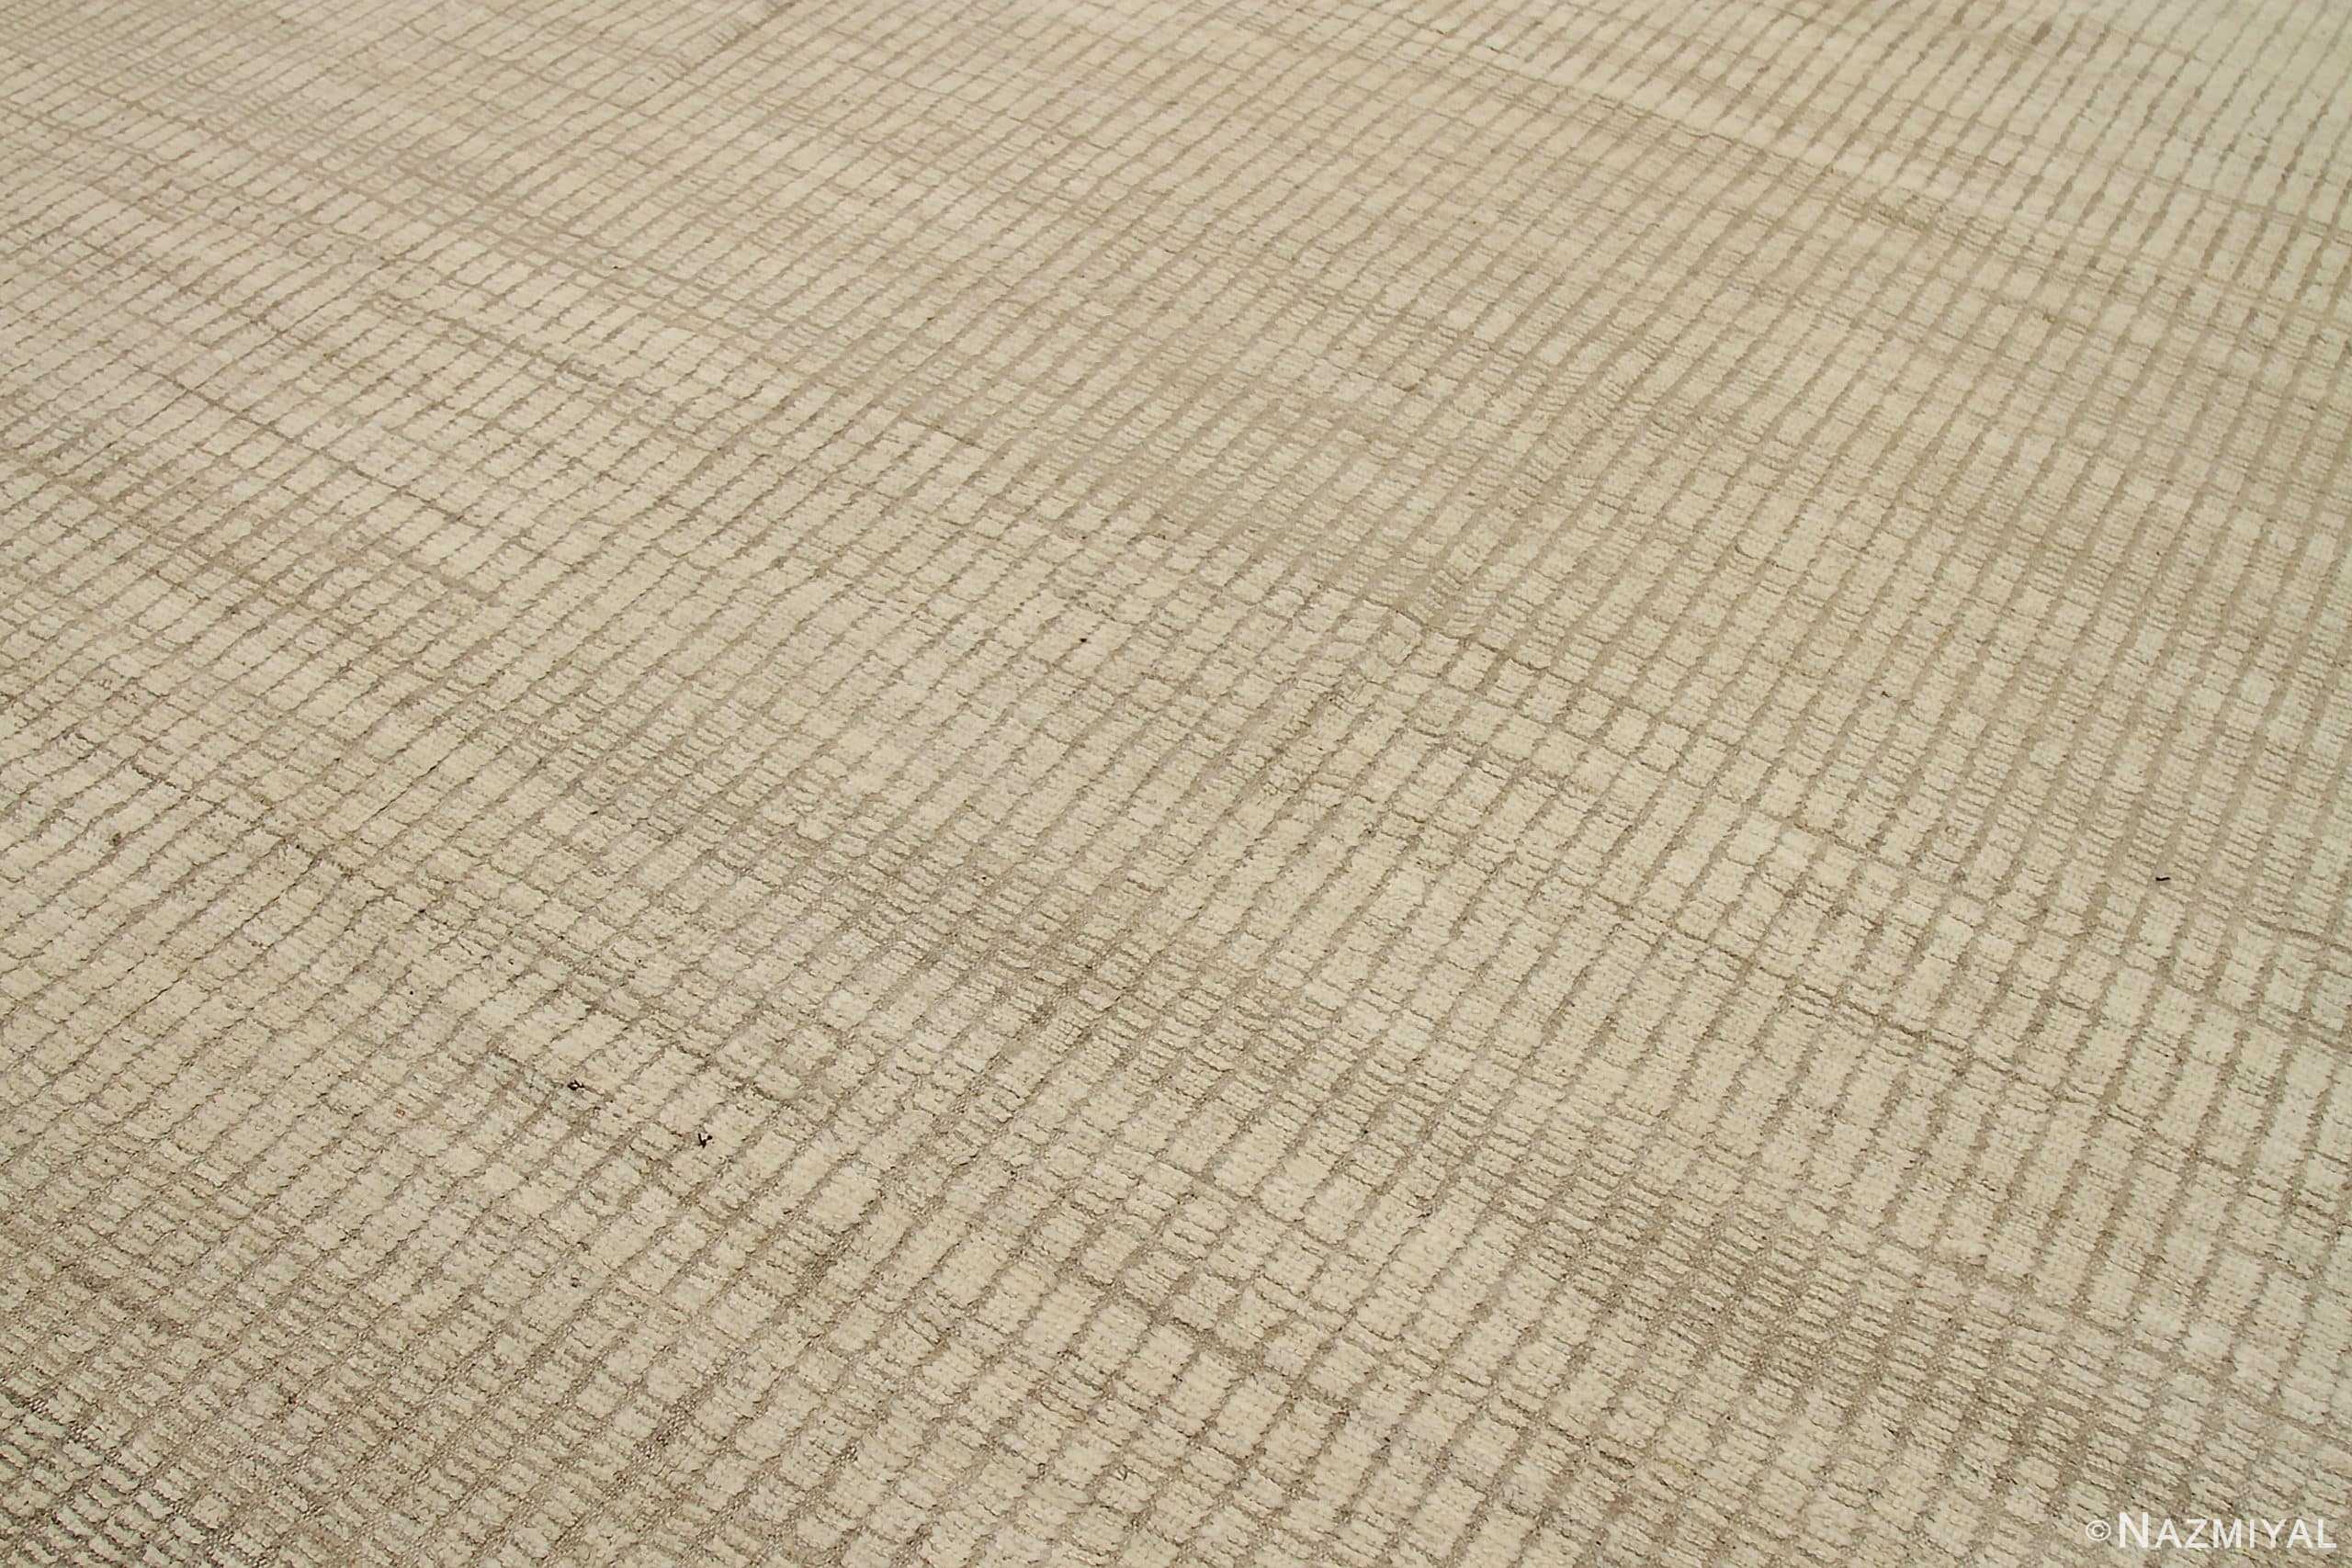 Details Of Green Beige Color Textured Modern Distressed Rug 60825 by Nazmiyal Antique Rugs